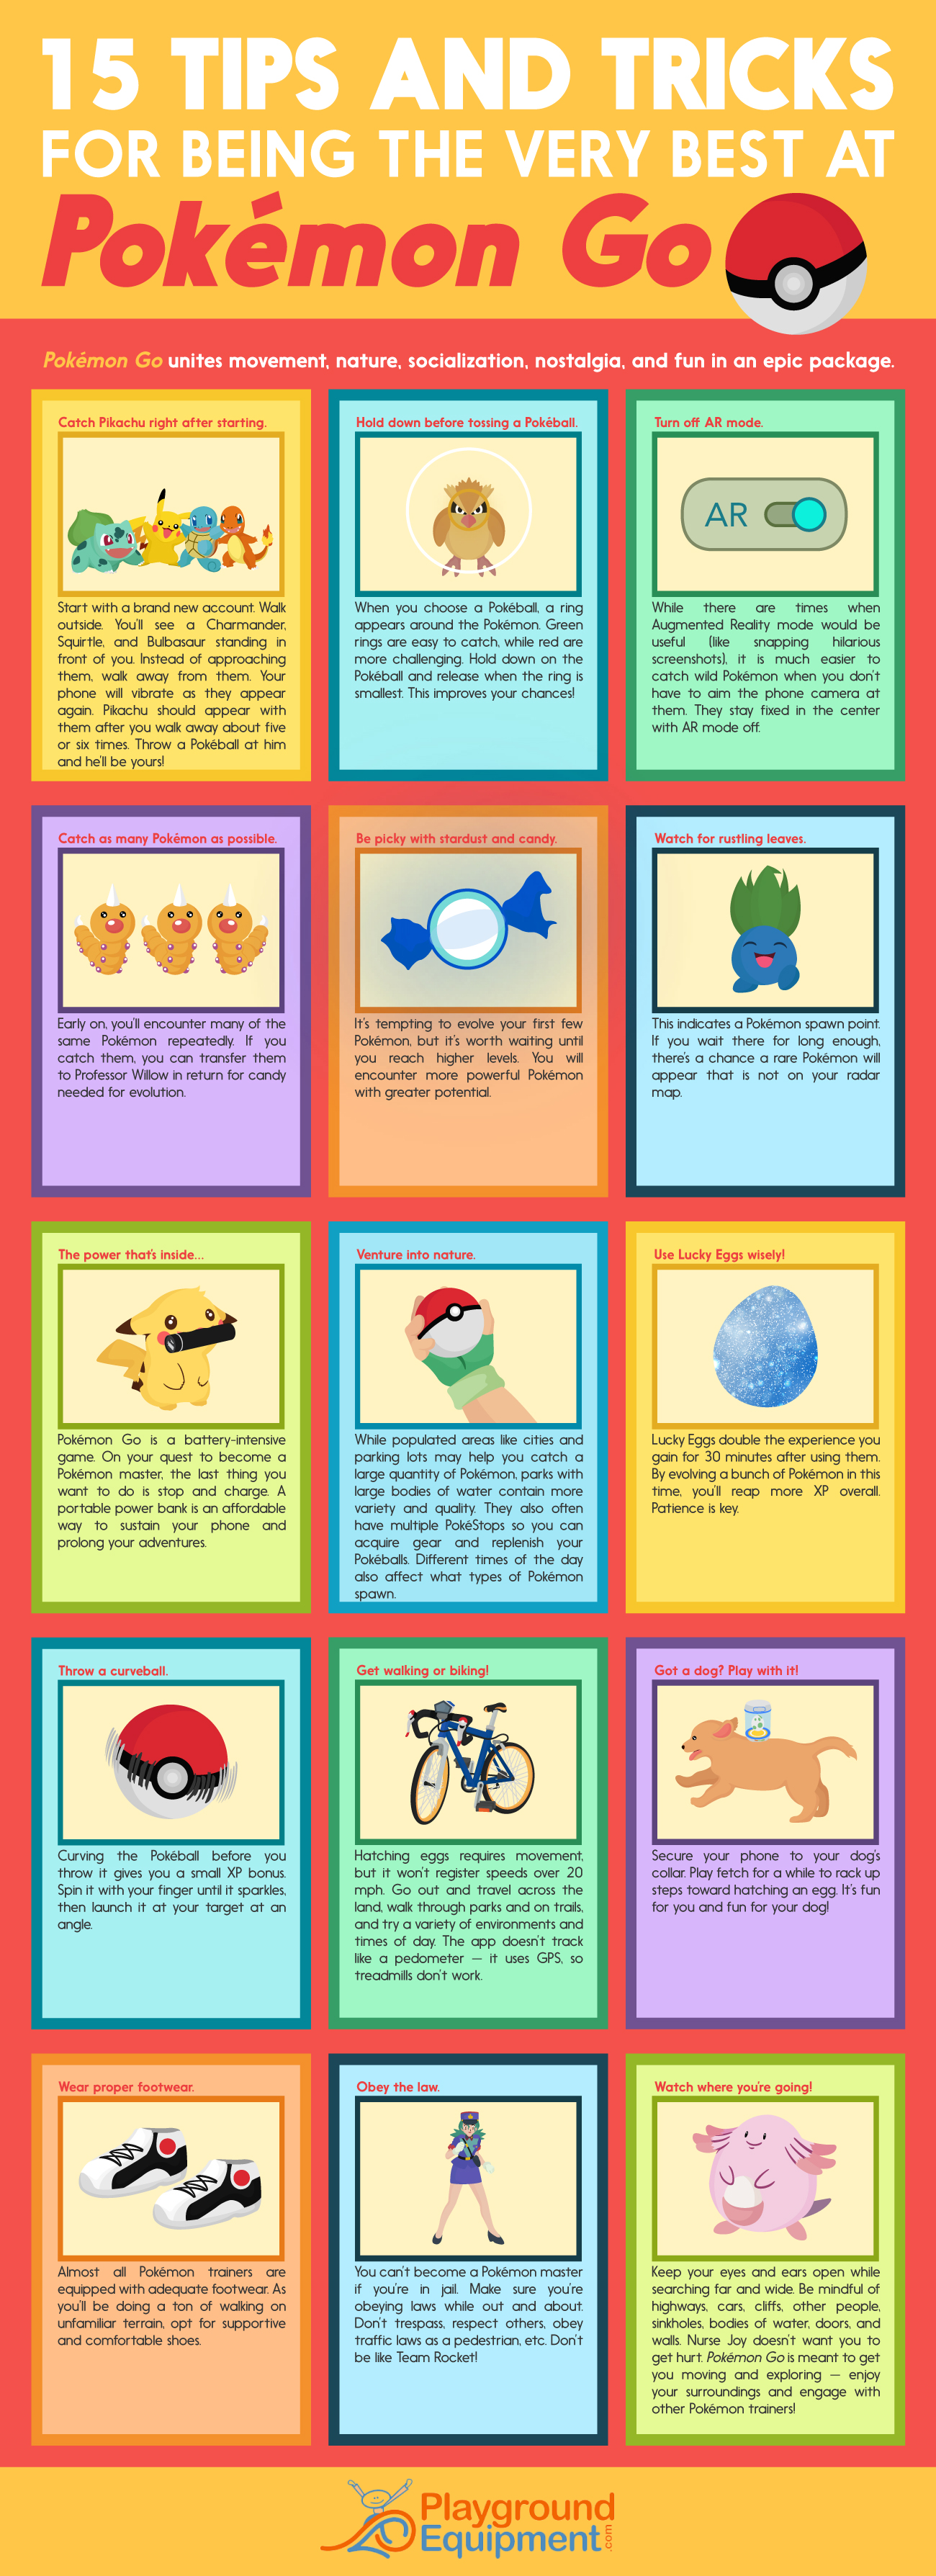 15 Tips and Tricks for being the Very Best at Pokémon Go - PlaygroundEquipment.com - Infographic